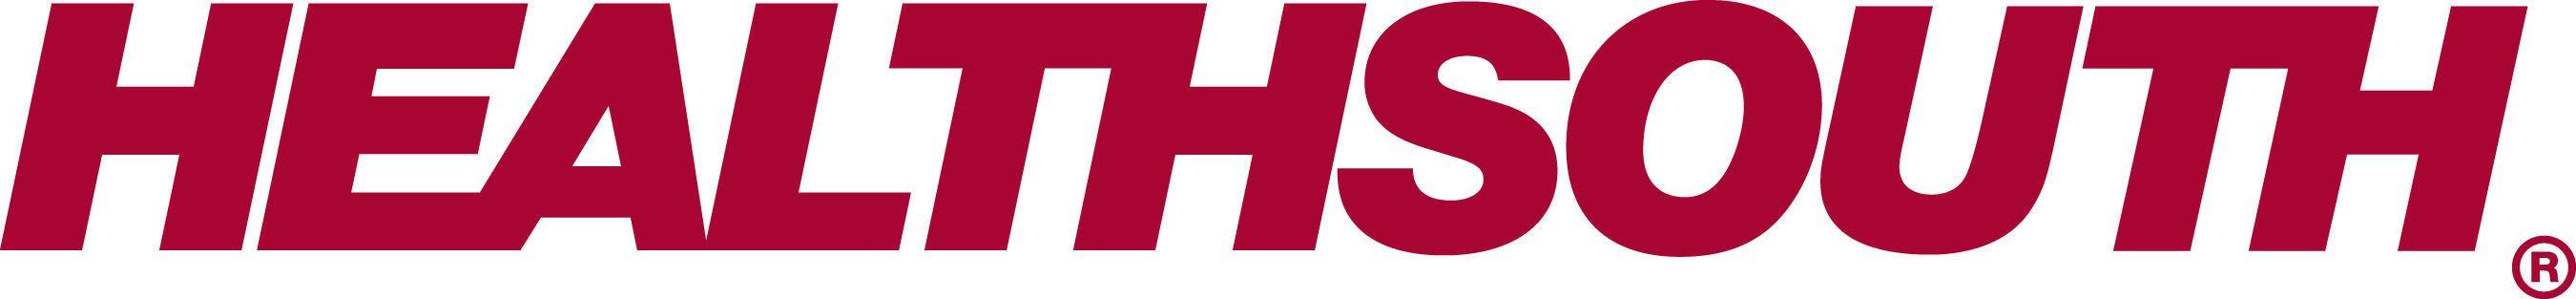 HealthSouth Logo - HealthSouth Corporation And University Medical Center Health System ...